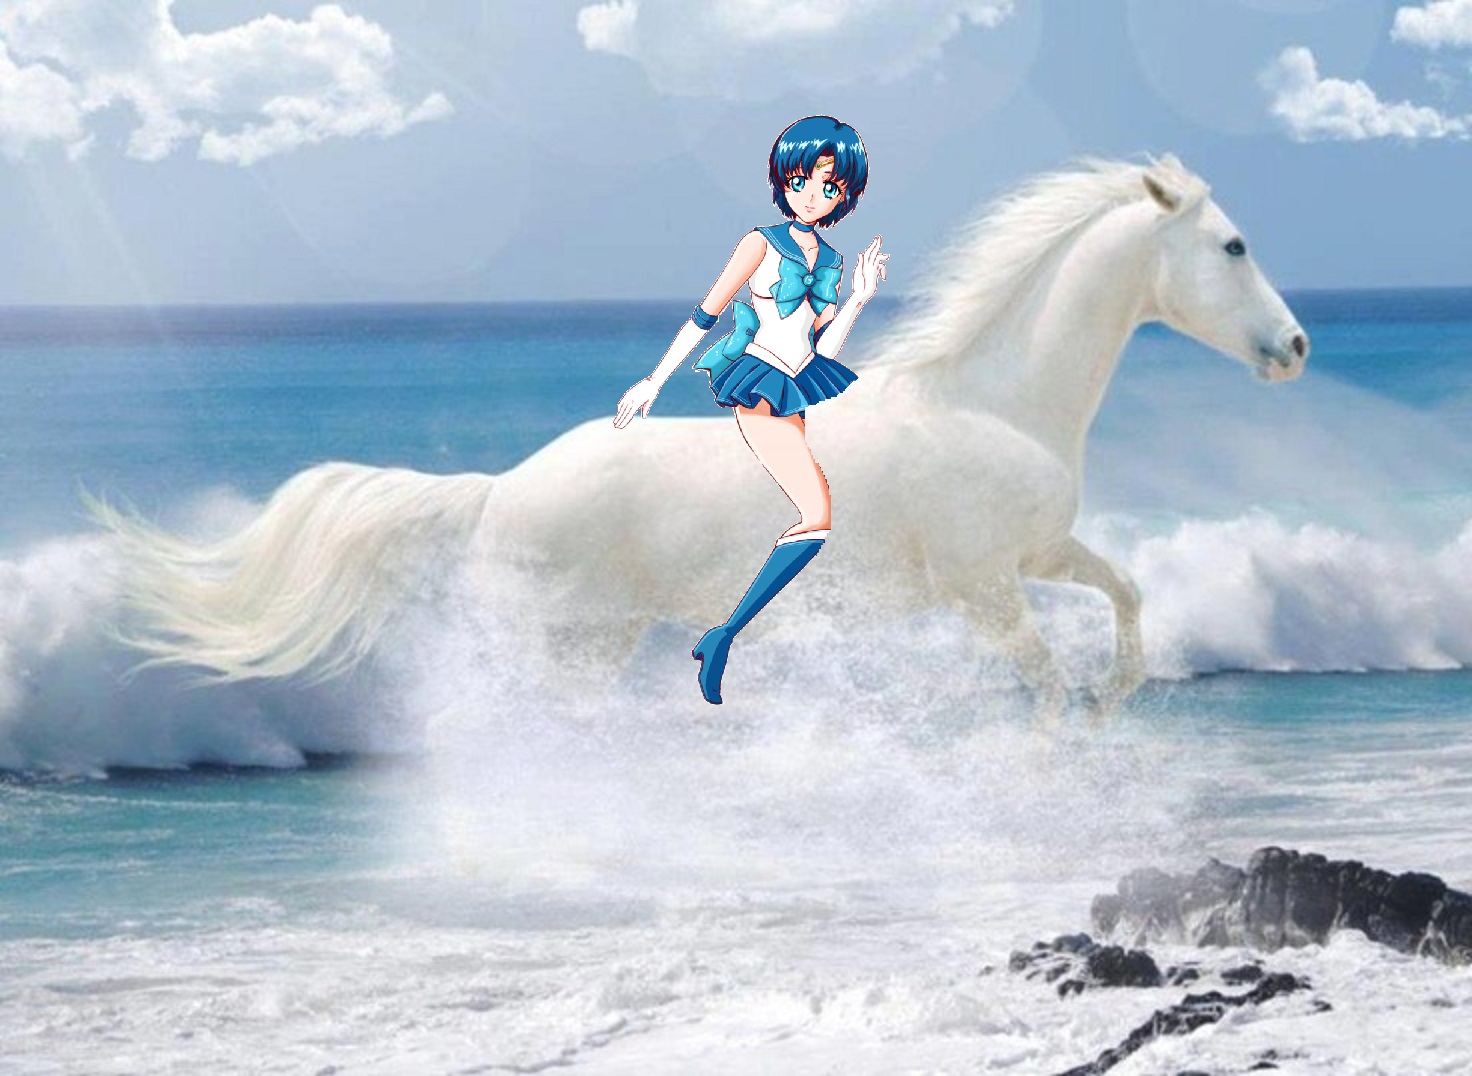 Sailor Mercury rides on her Beautiful White Steed